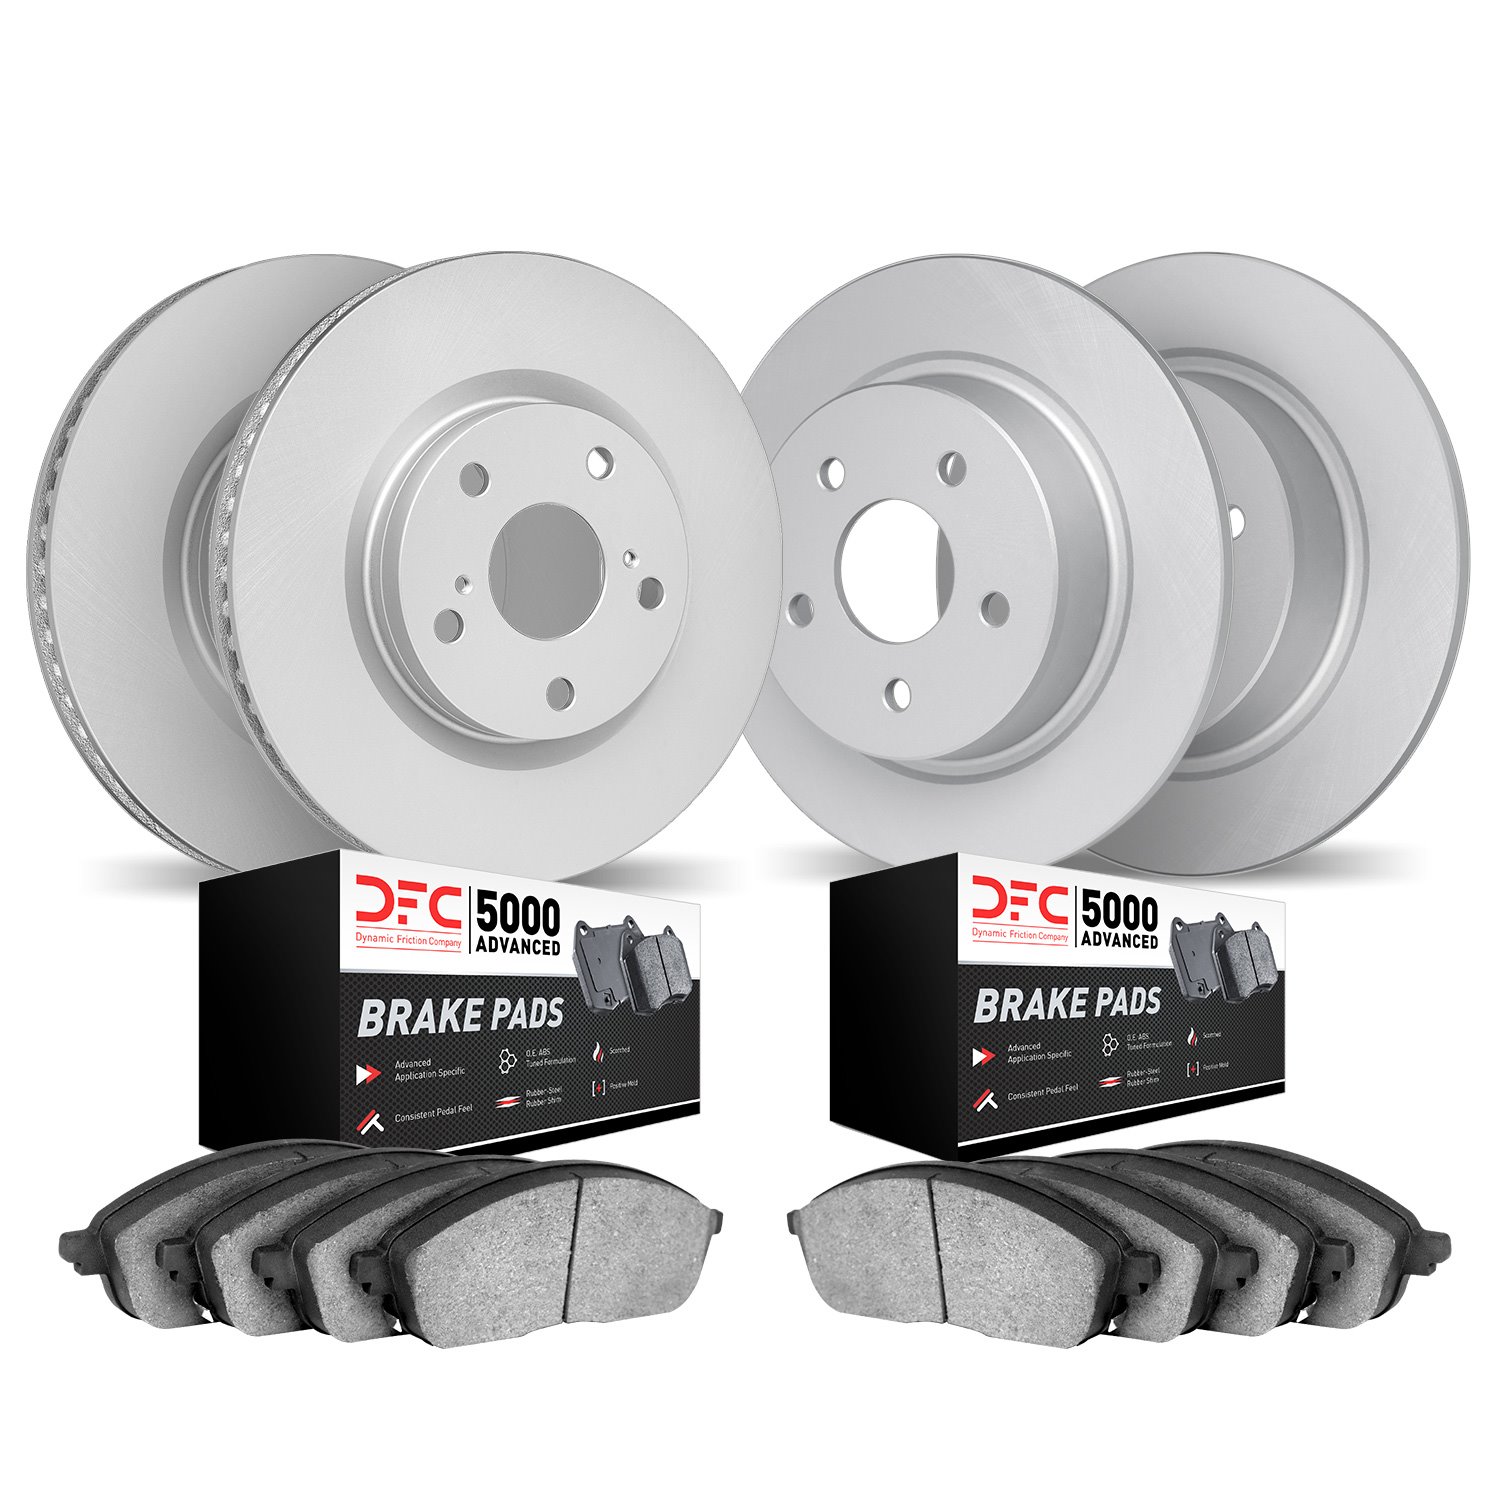 4504-54060 Geospec Brake Rotors w/5000 Advanced Brake Pads Kit, 2006-2010 Ford/Lincoln/Mercury/Mazda, Position: Front and Rear